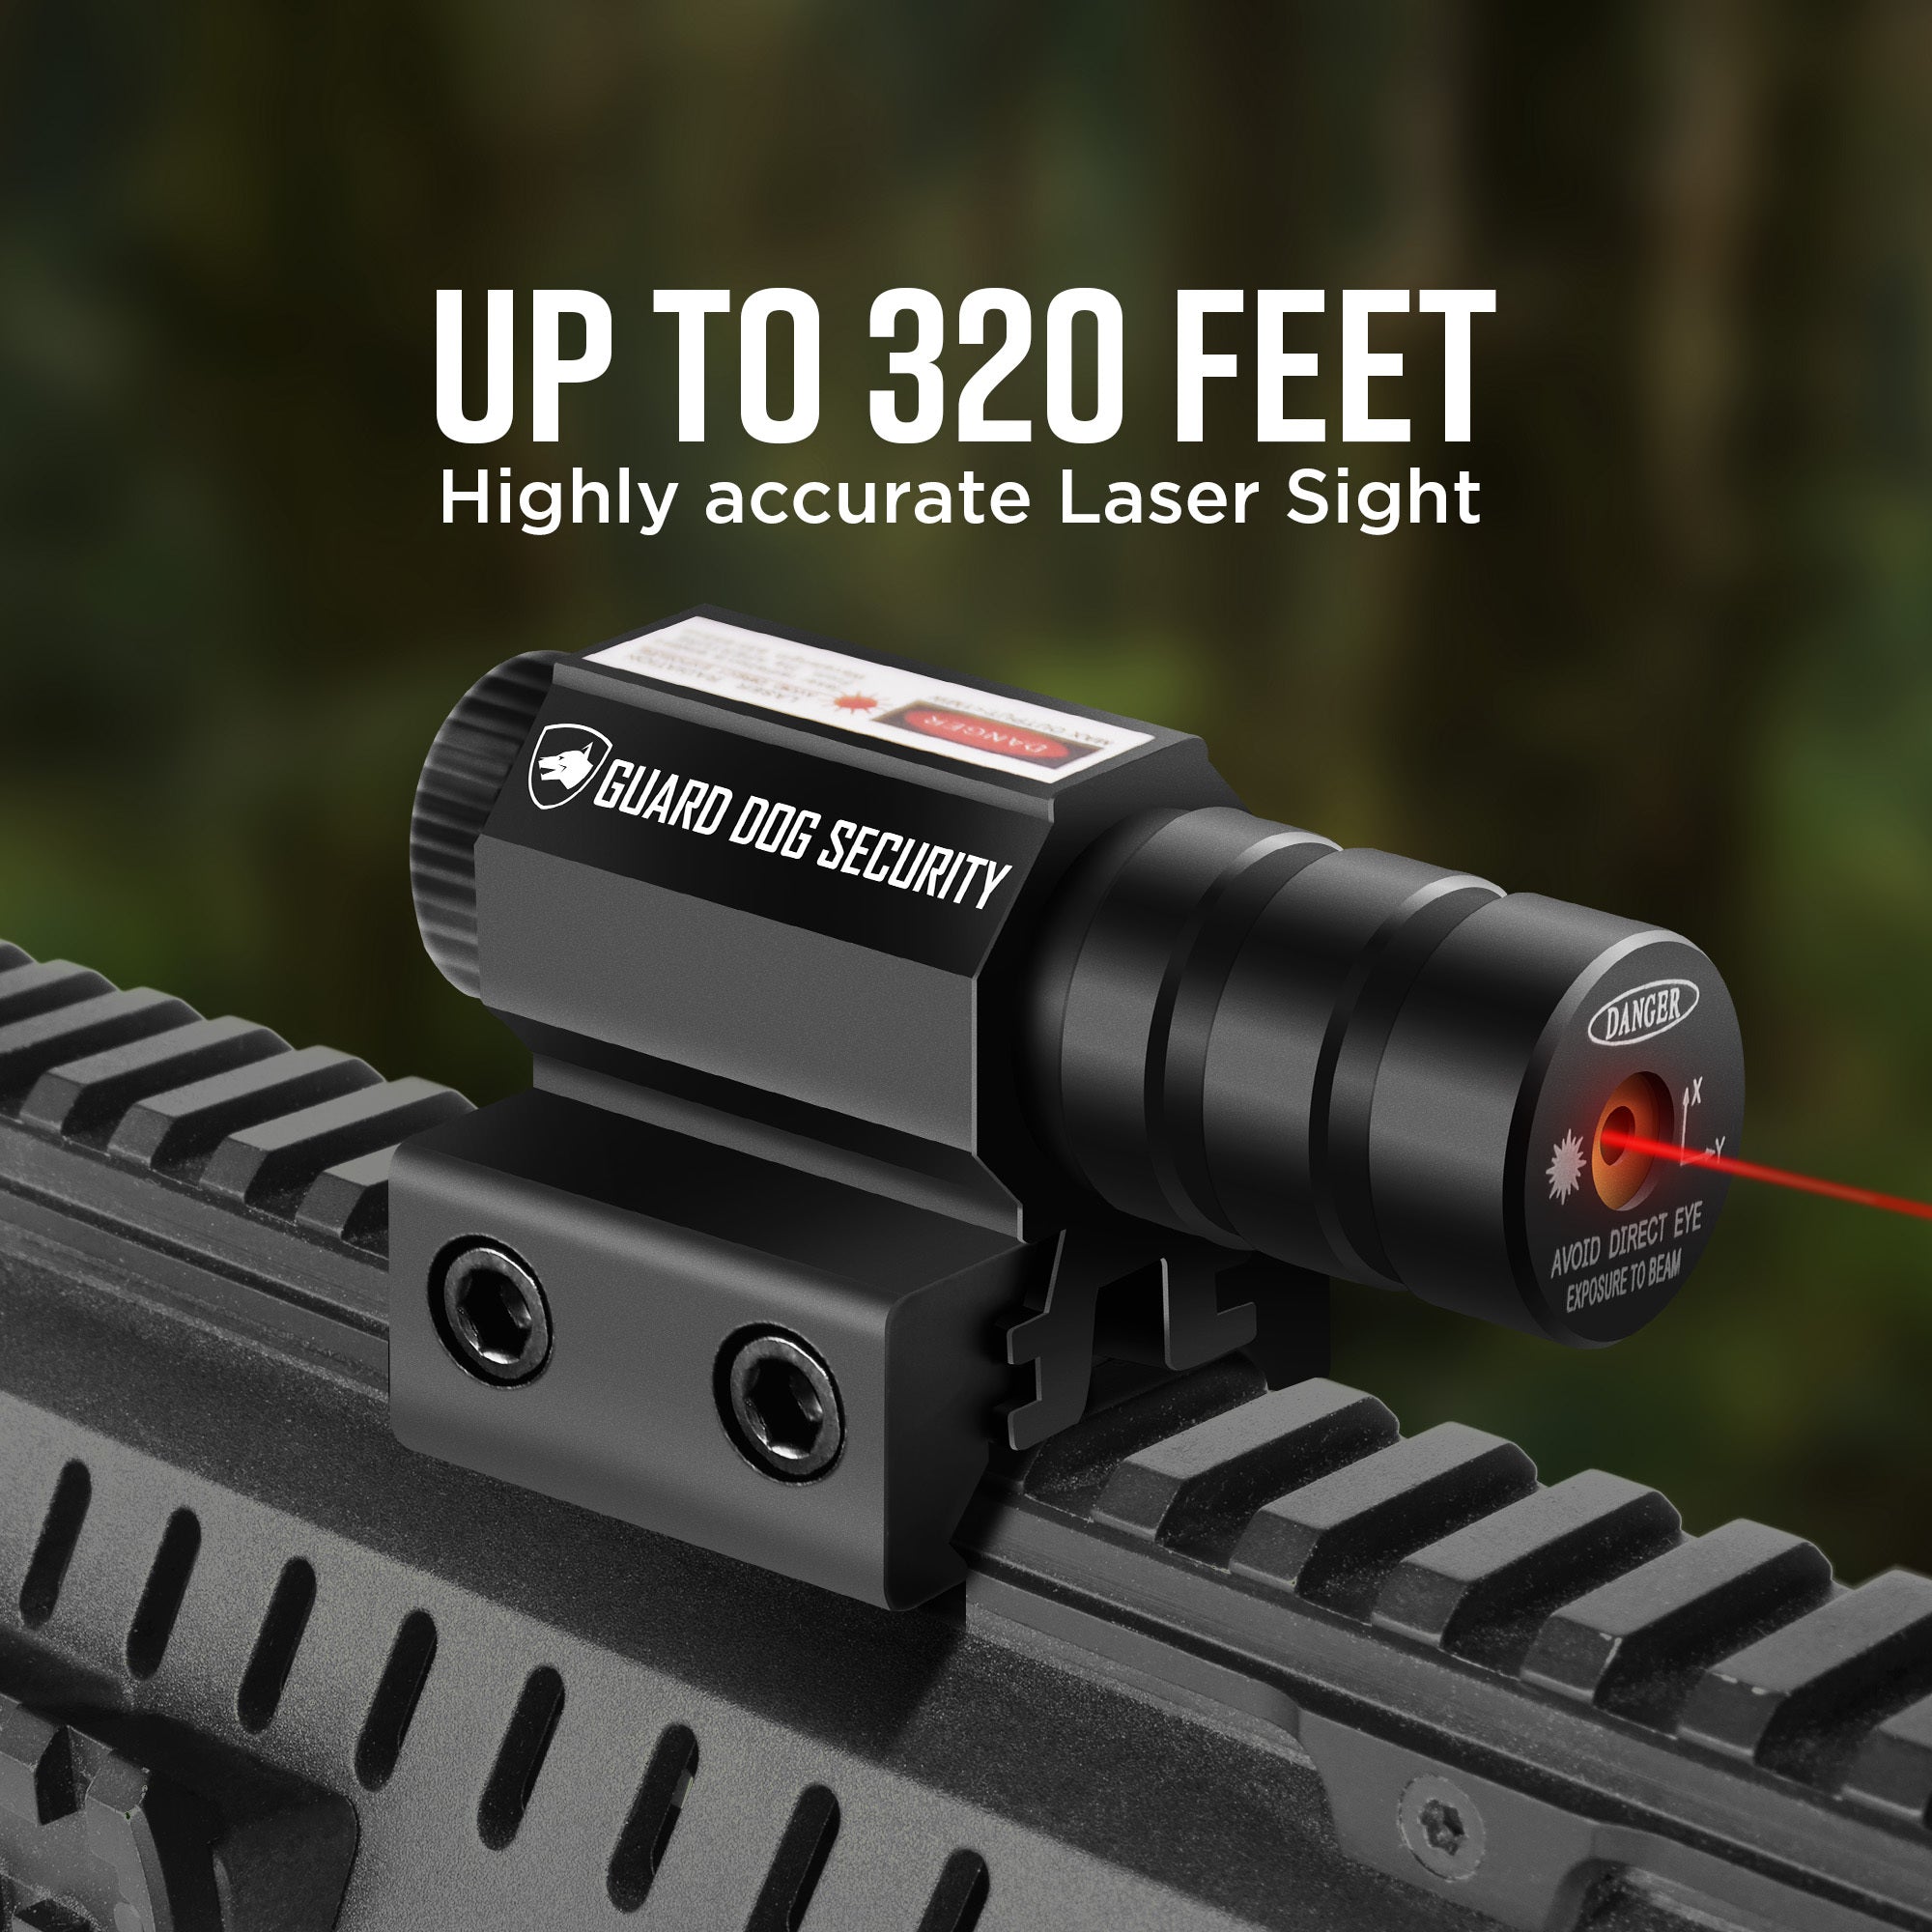 Tactical Red Dot Laser Sight, Picatinny and Dovetail Rail Compatible – Up to 320 feet